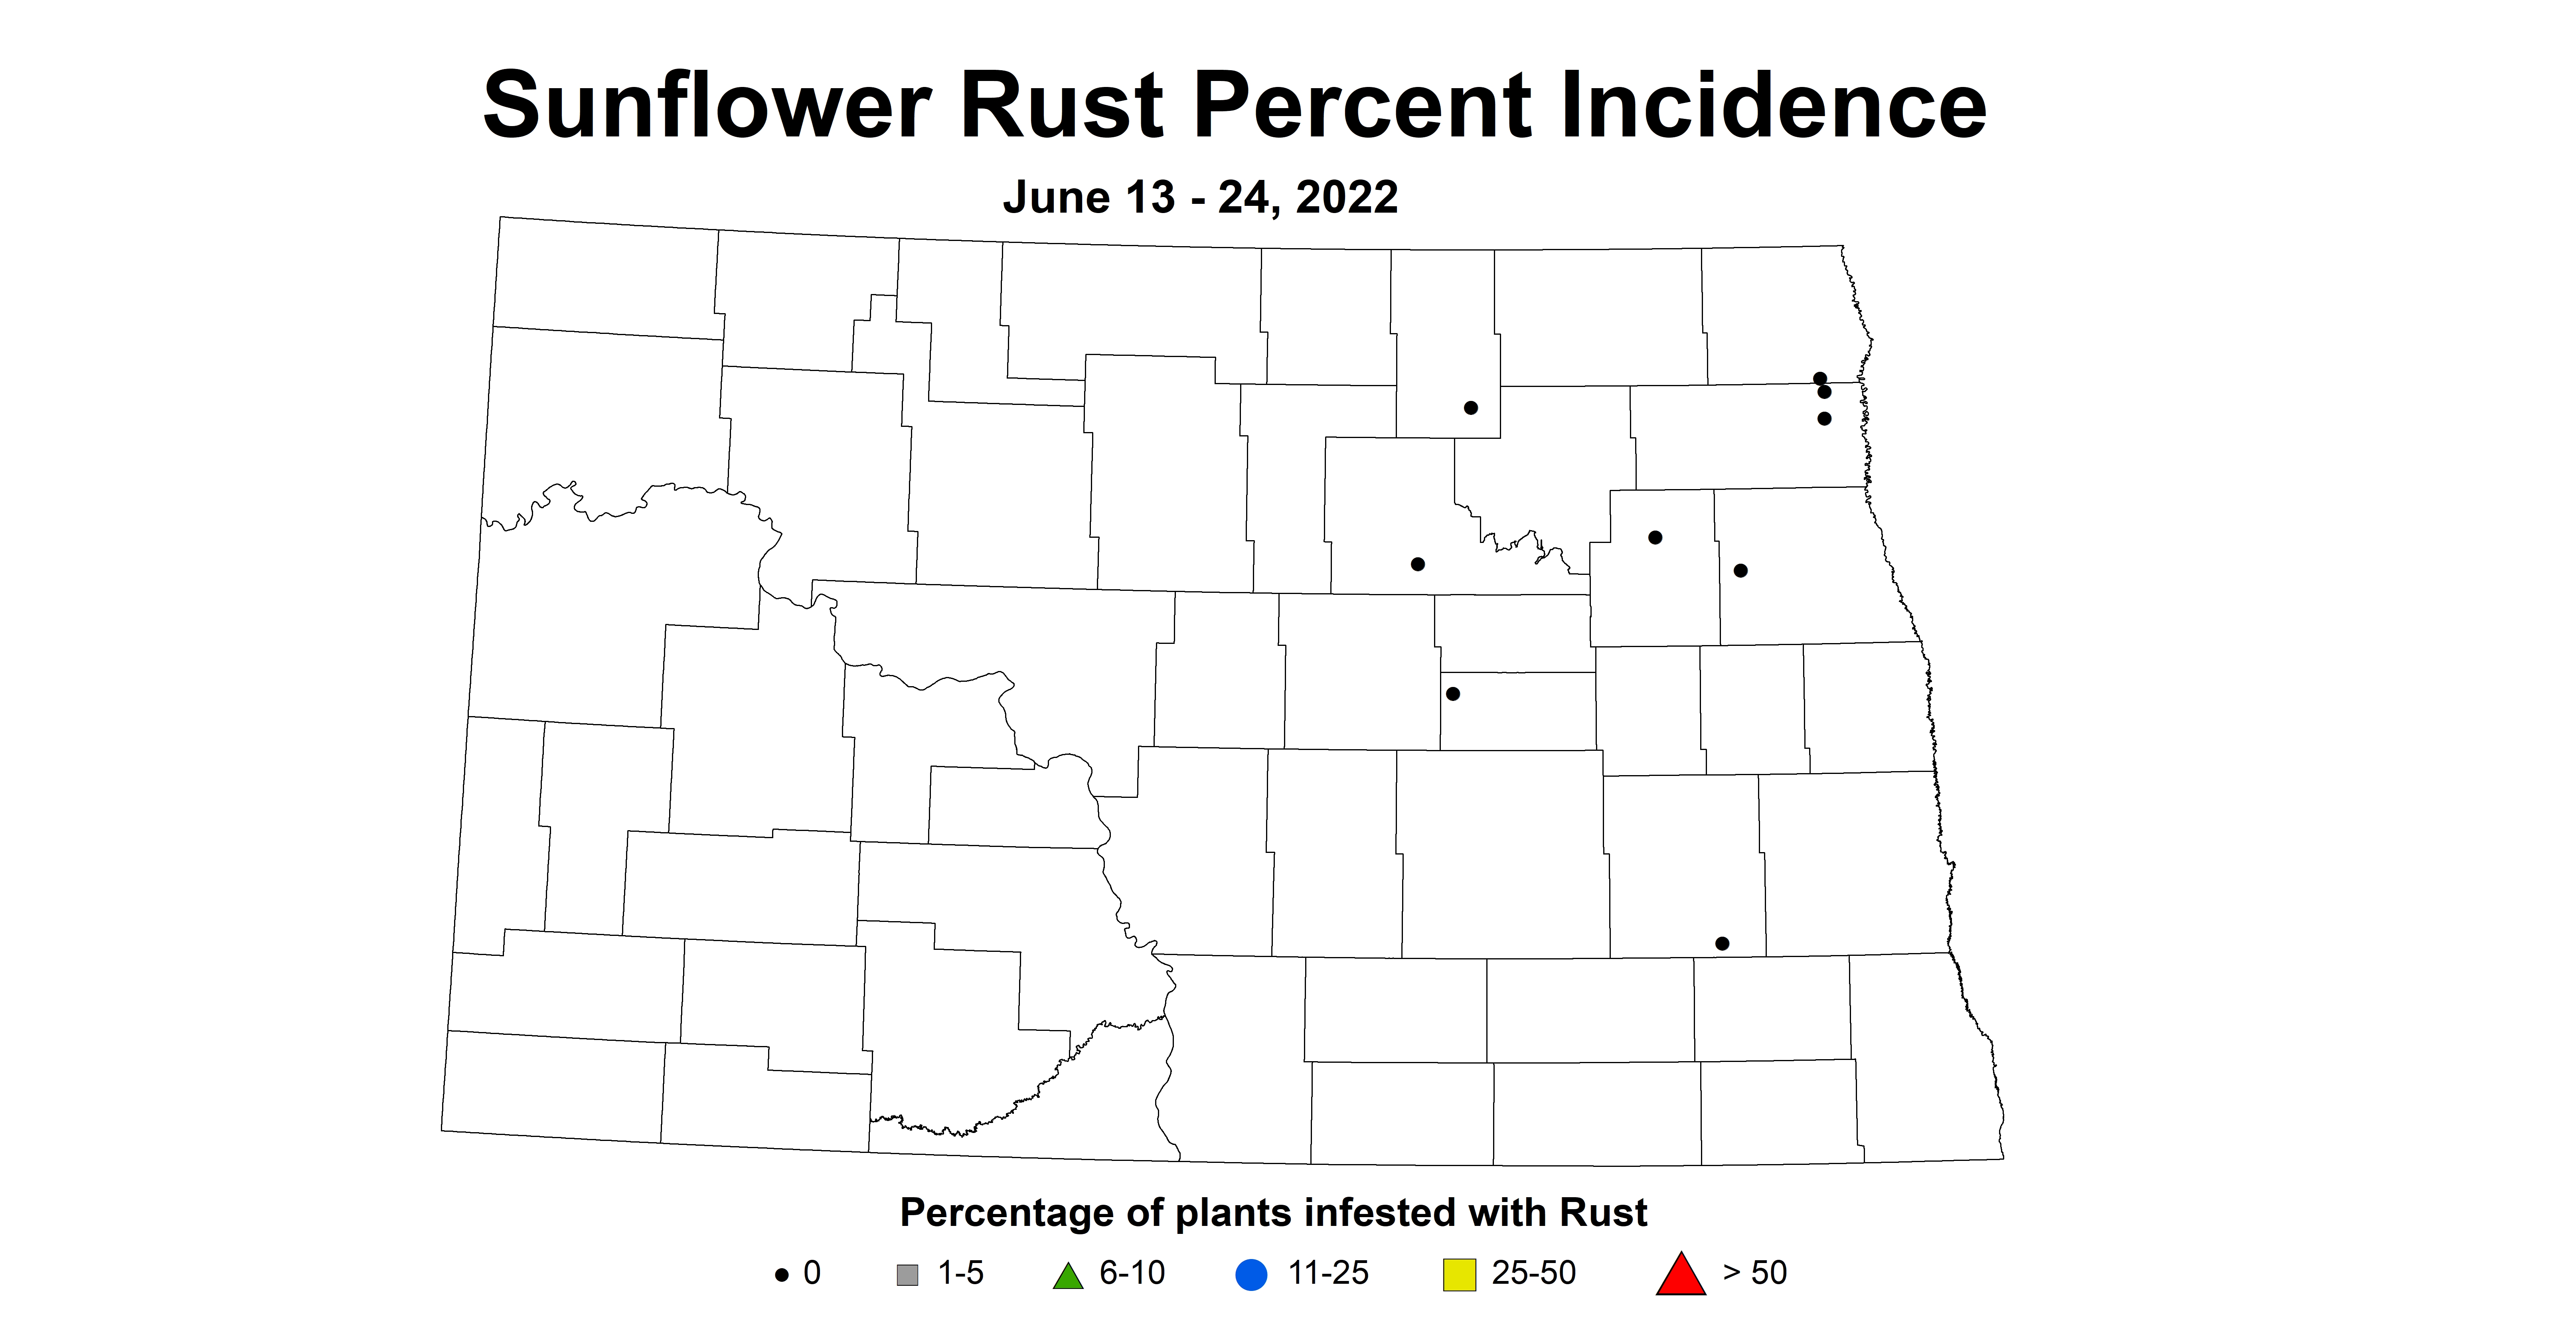 ND IPM map of sunflower leaf rust incidence June 13 - 24, 2022